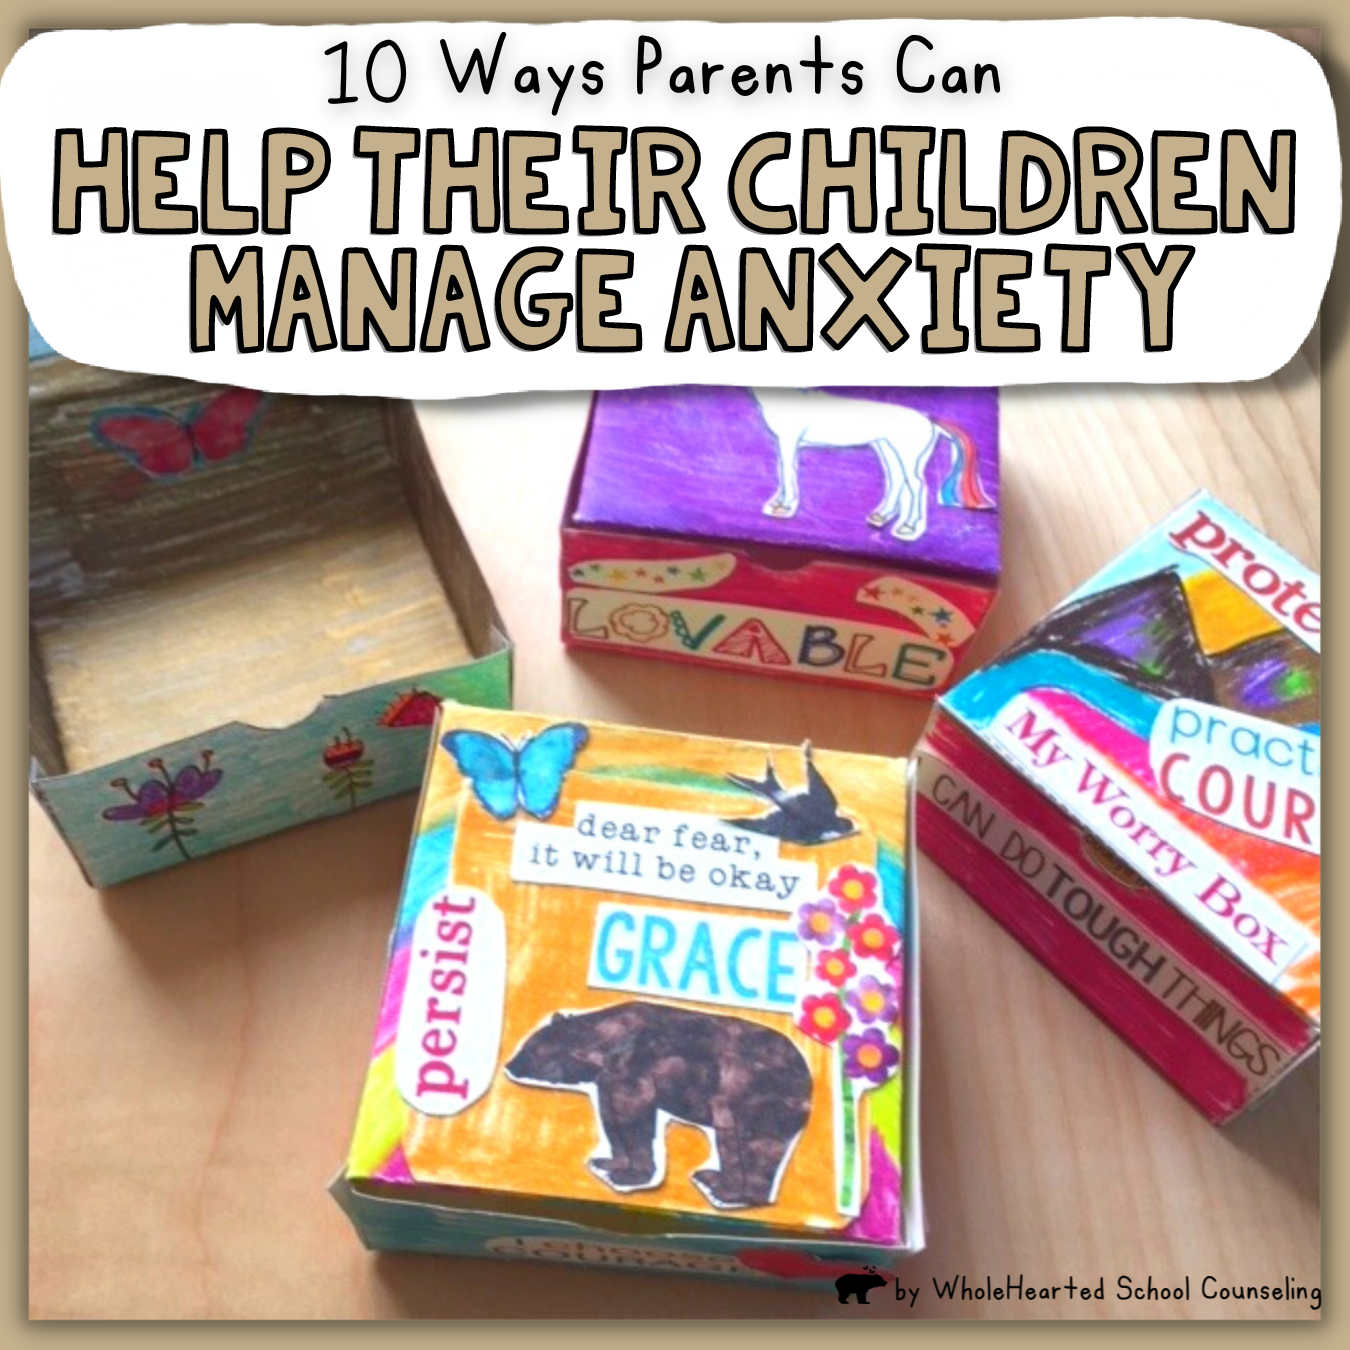 10 ways parents can help their children manage anxiety. Includes making worry boxes.